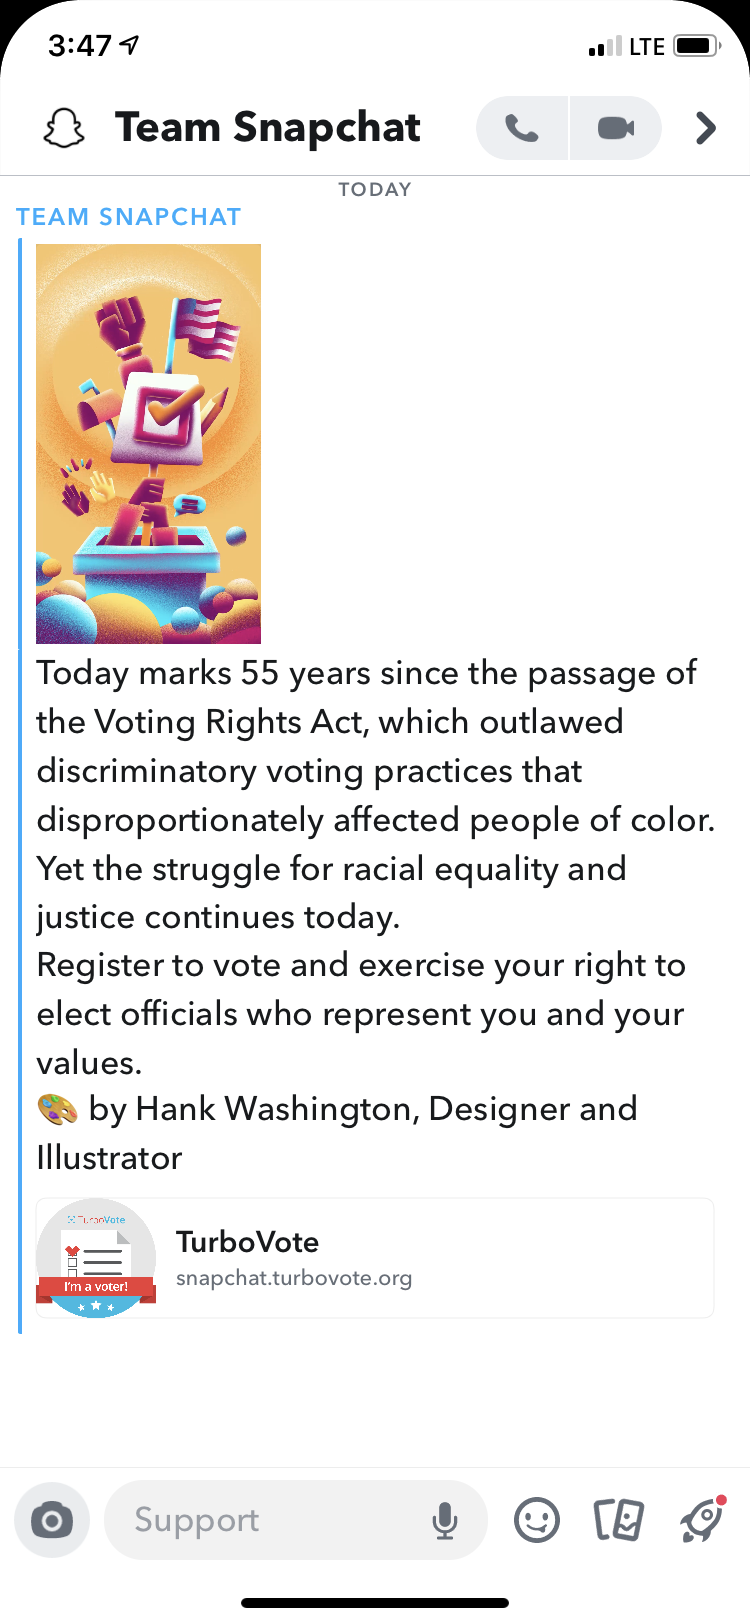 Screenshot of a Snapchat post made by Team Snapchat on Aug. 6, 2020. Post consists of a graphic of a ballot box and the message "Today marks 55 years since the passage of the Voting Rights Act, which outlawed discriminatory practices that disproportionally affected people of color. Yet the struggle for racial equality and justice continues today. Register to vote and exercise your right to elect individuals who represent you and your values."